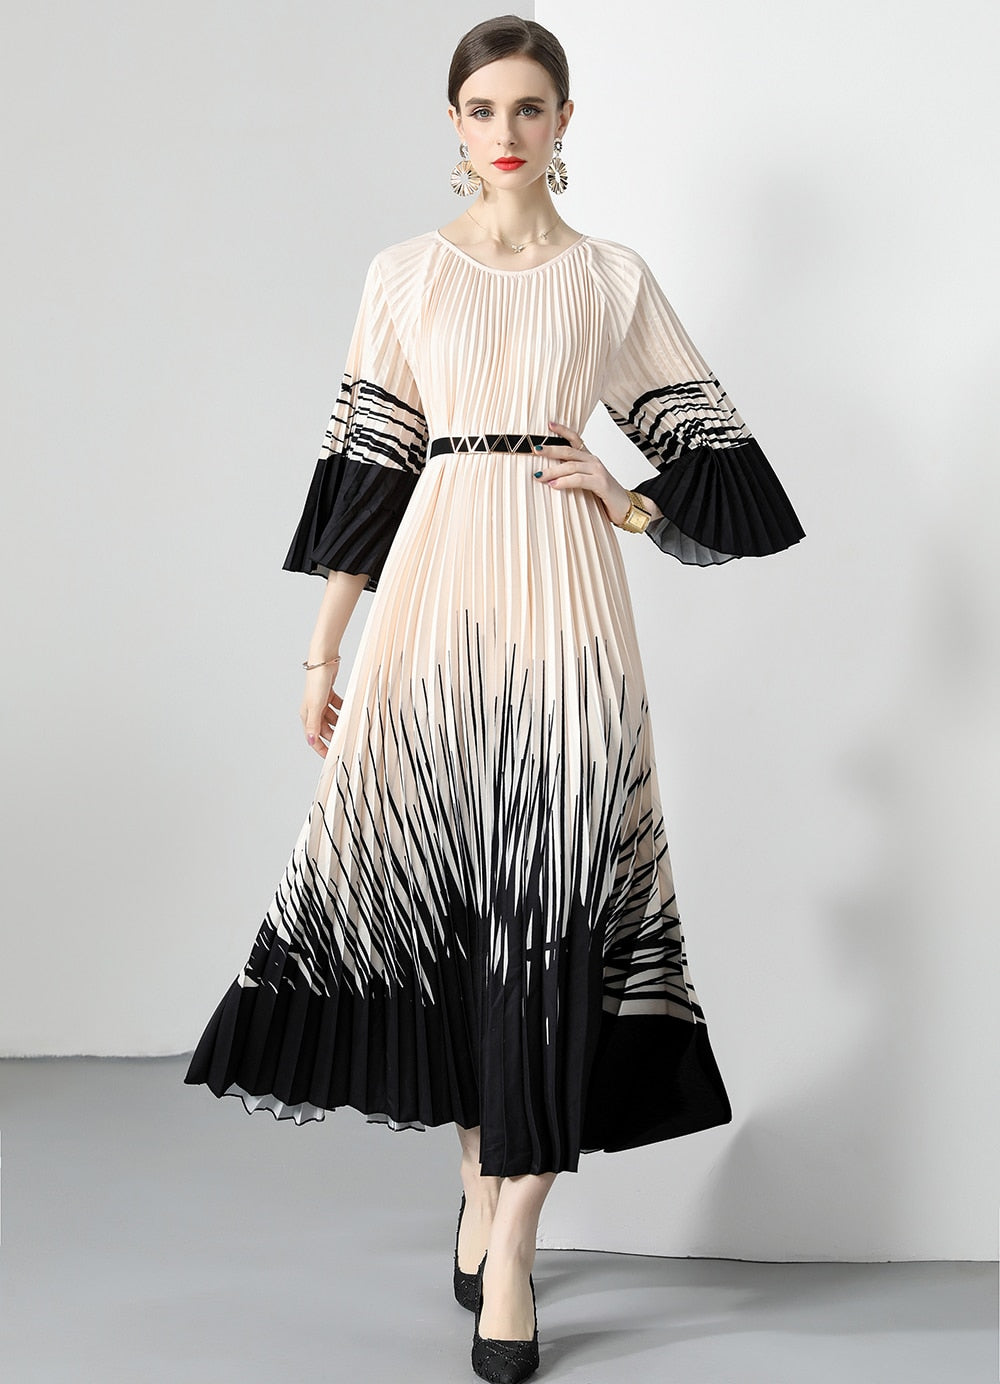 Miyake New Summer Pleated Long Dress Women O-Neck Lace-up Belt Print Loose Large Size Vintage Party Party Maxi Dress 2023